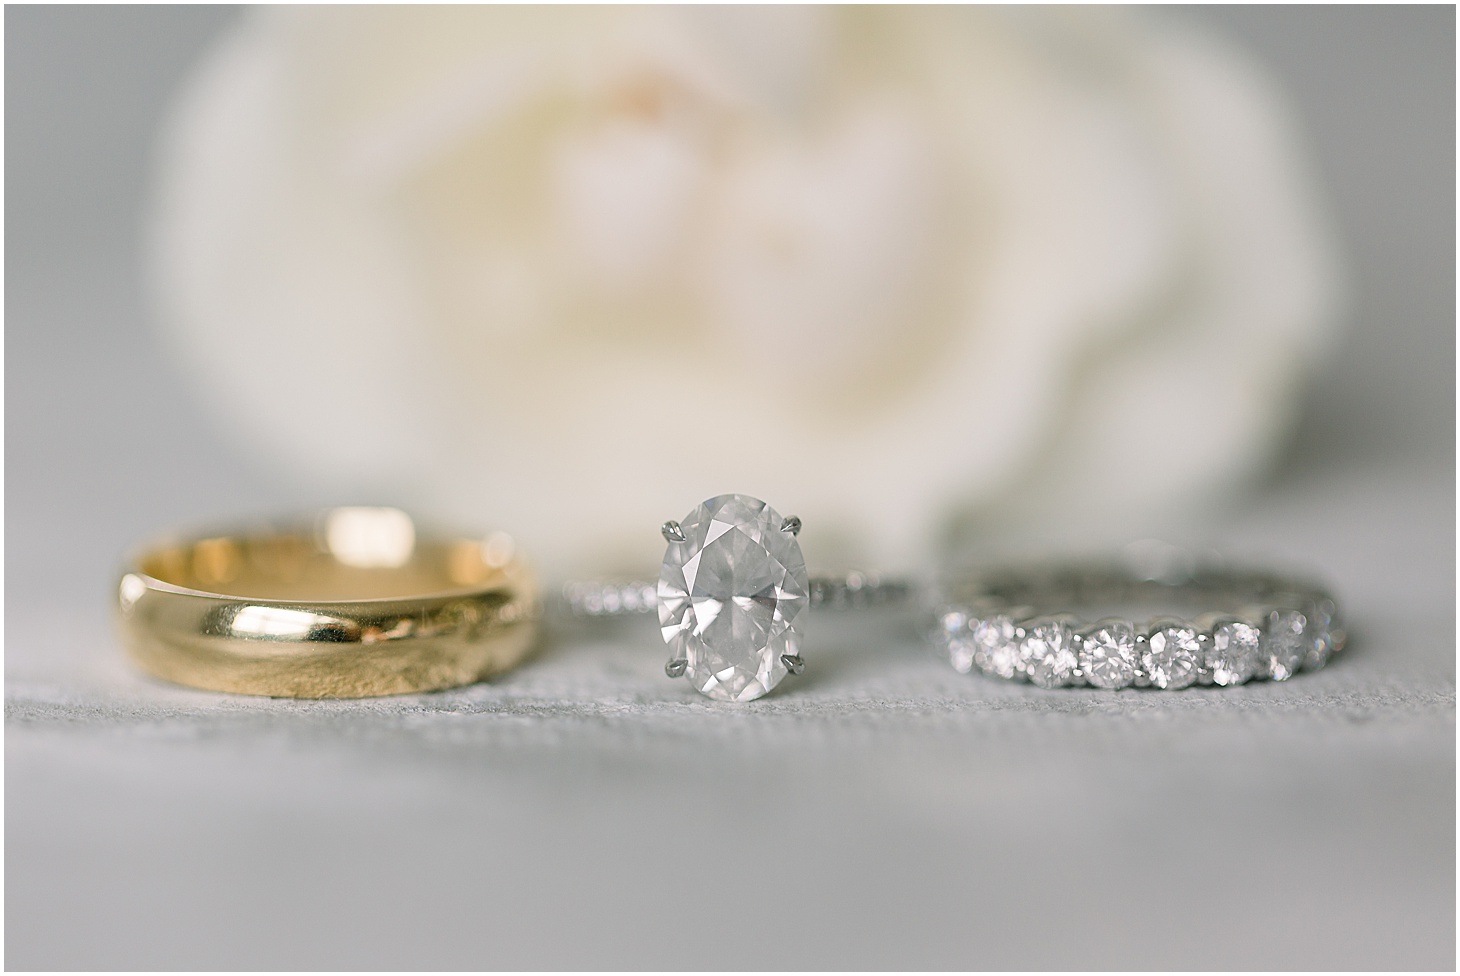 Oval Engagement Ring and Wedding Bands, Bridal Details at Inter-Continental Hotel at Navy Yards in DC, Modern Textural Spring Wedding at District Winery, Sarah Bradshaw Photography, DC Wedding Photographer